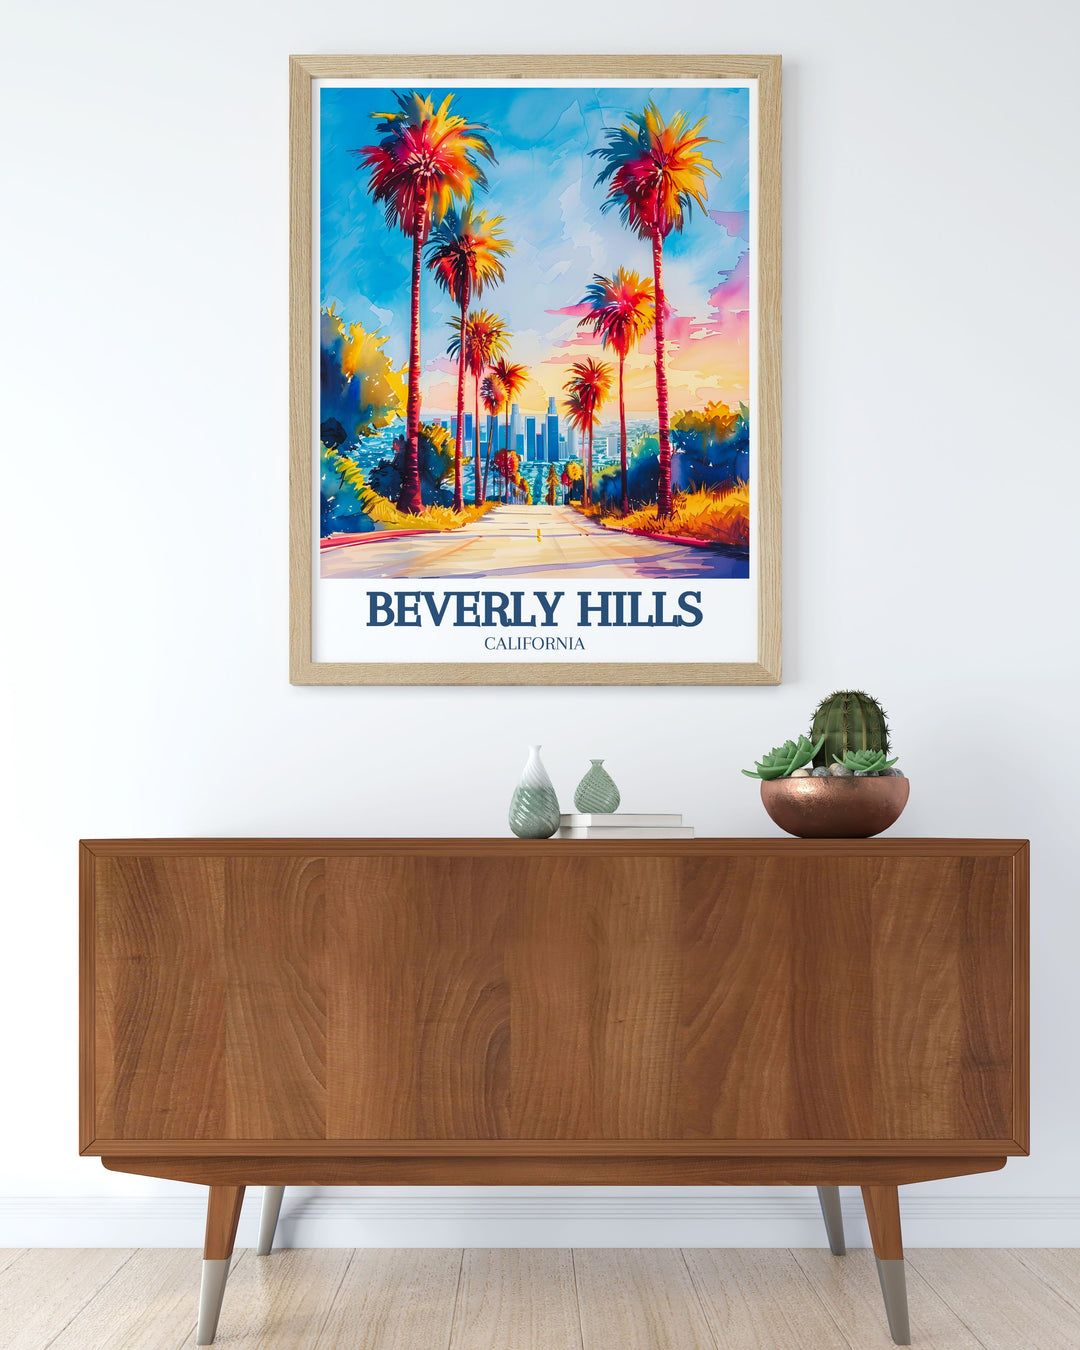 Scenic California travel print showcasing the breathtaking views of Sunset Boulevard and the Los Angeles cityscape, making a perfect gift for anniversaries or birthdays. Brings the beauty of Californias landmarks into your home.